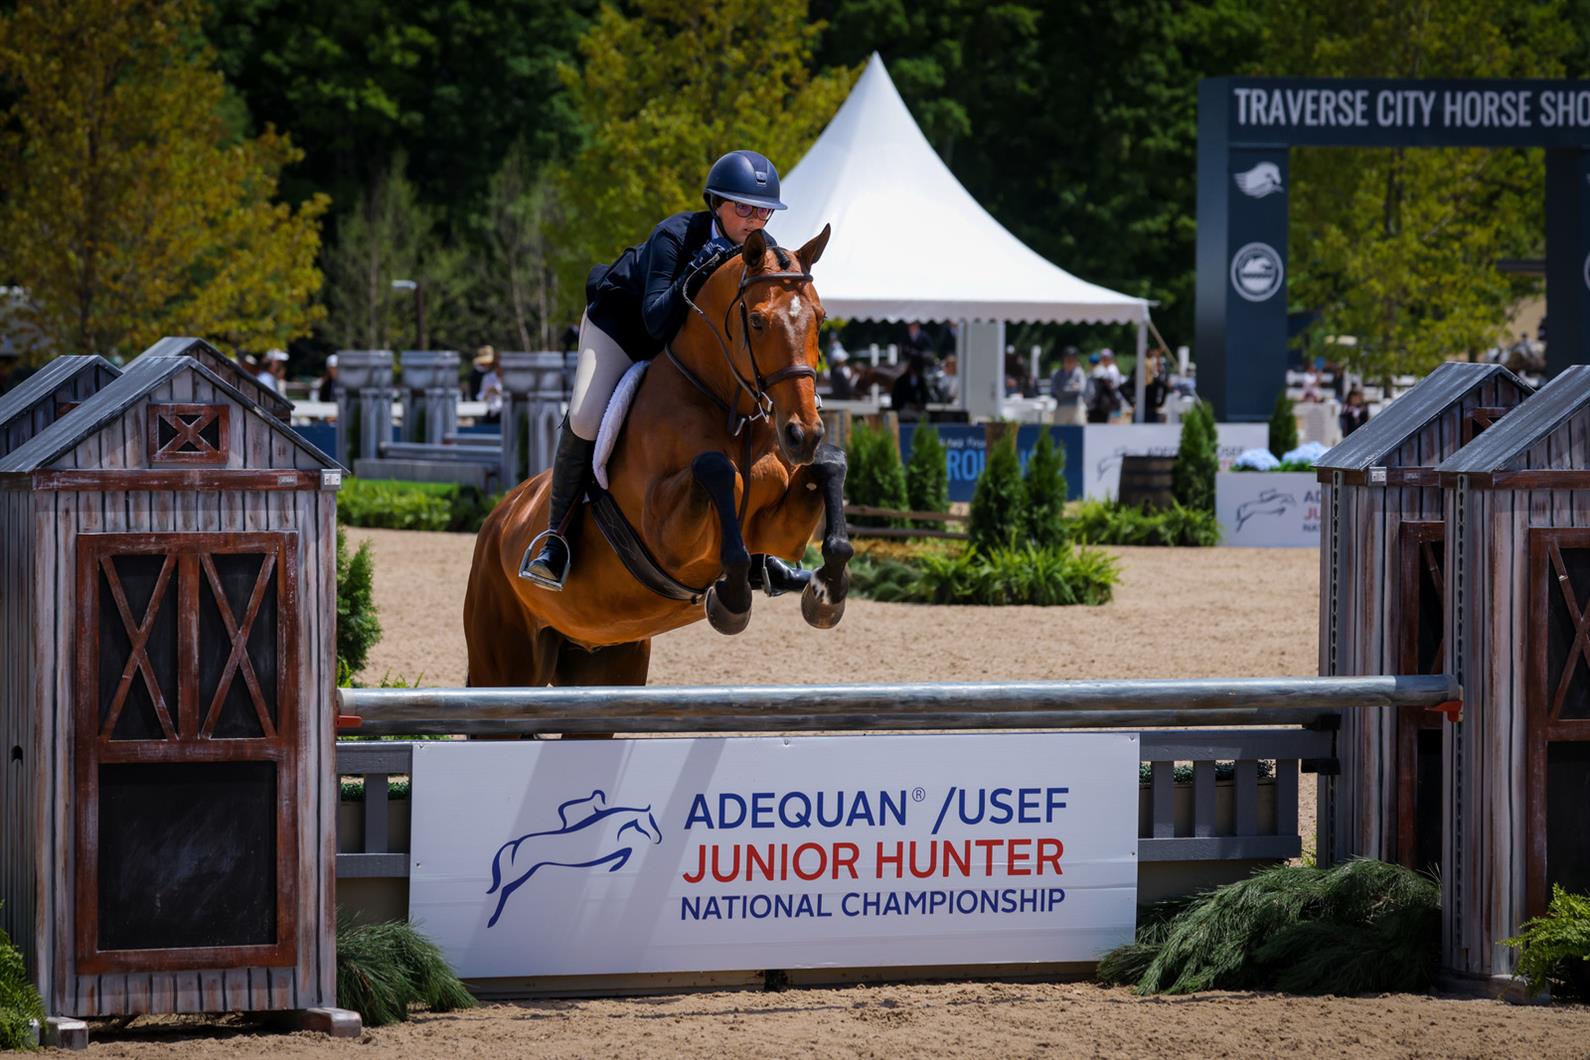 Nice to Have and Sutton Suelthaus jumping over a Junior Hunter National Championship branded jump